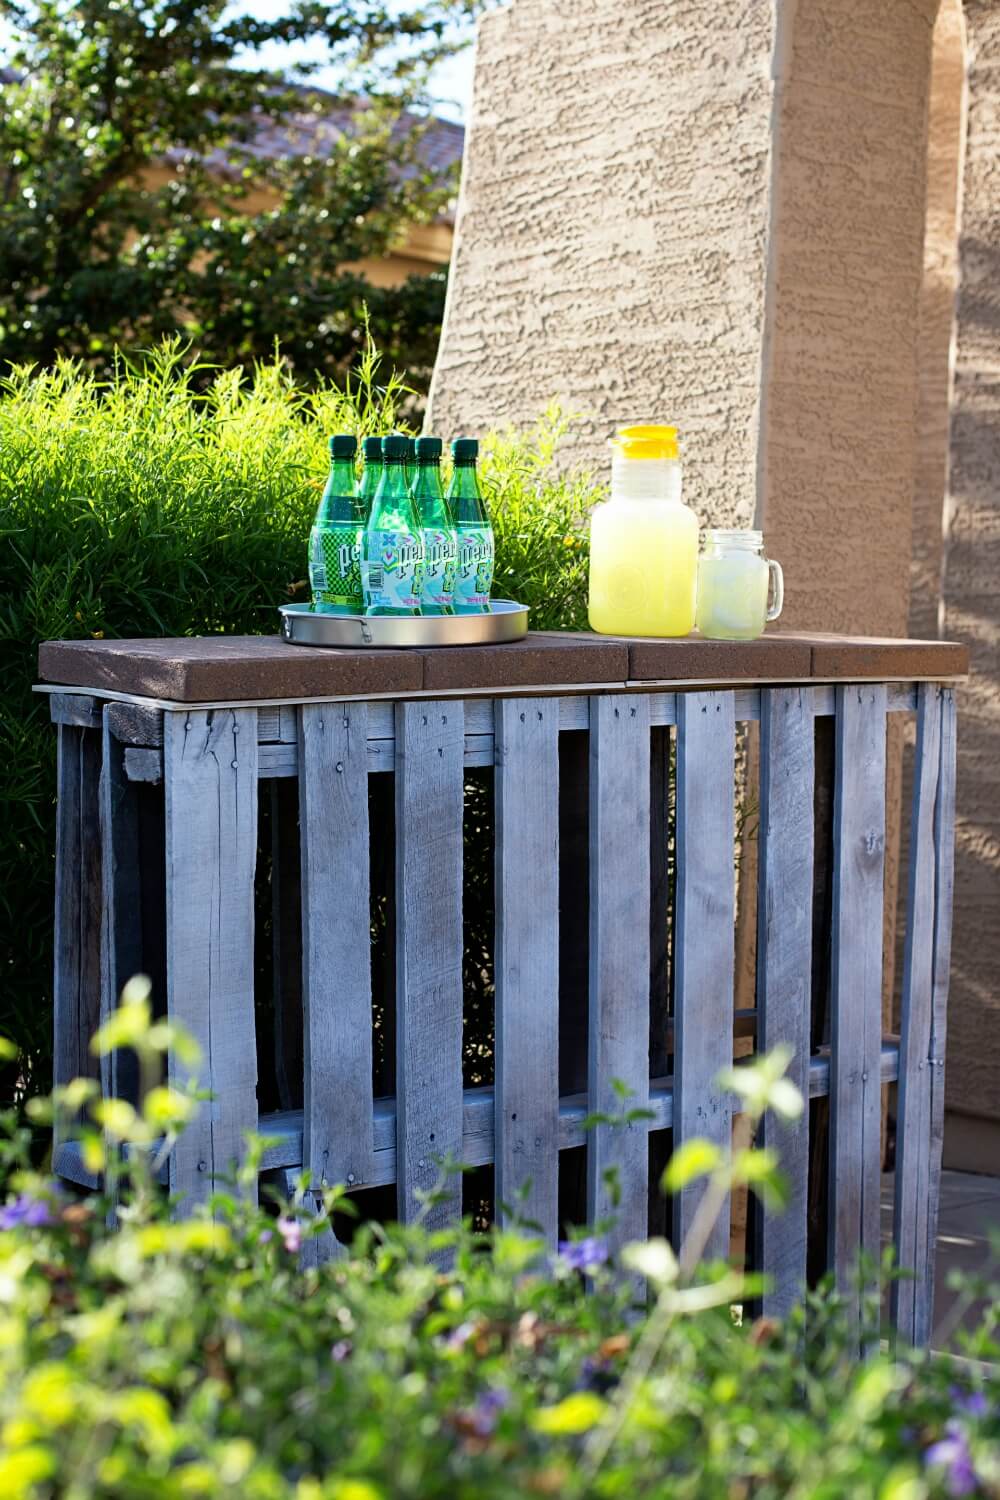 A Recycled Pallet Bar Near a Hedge